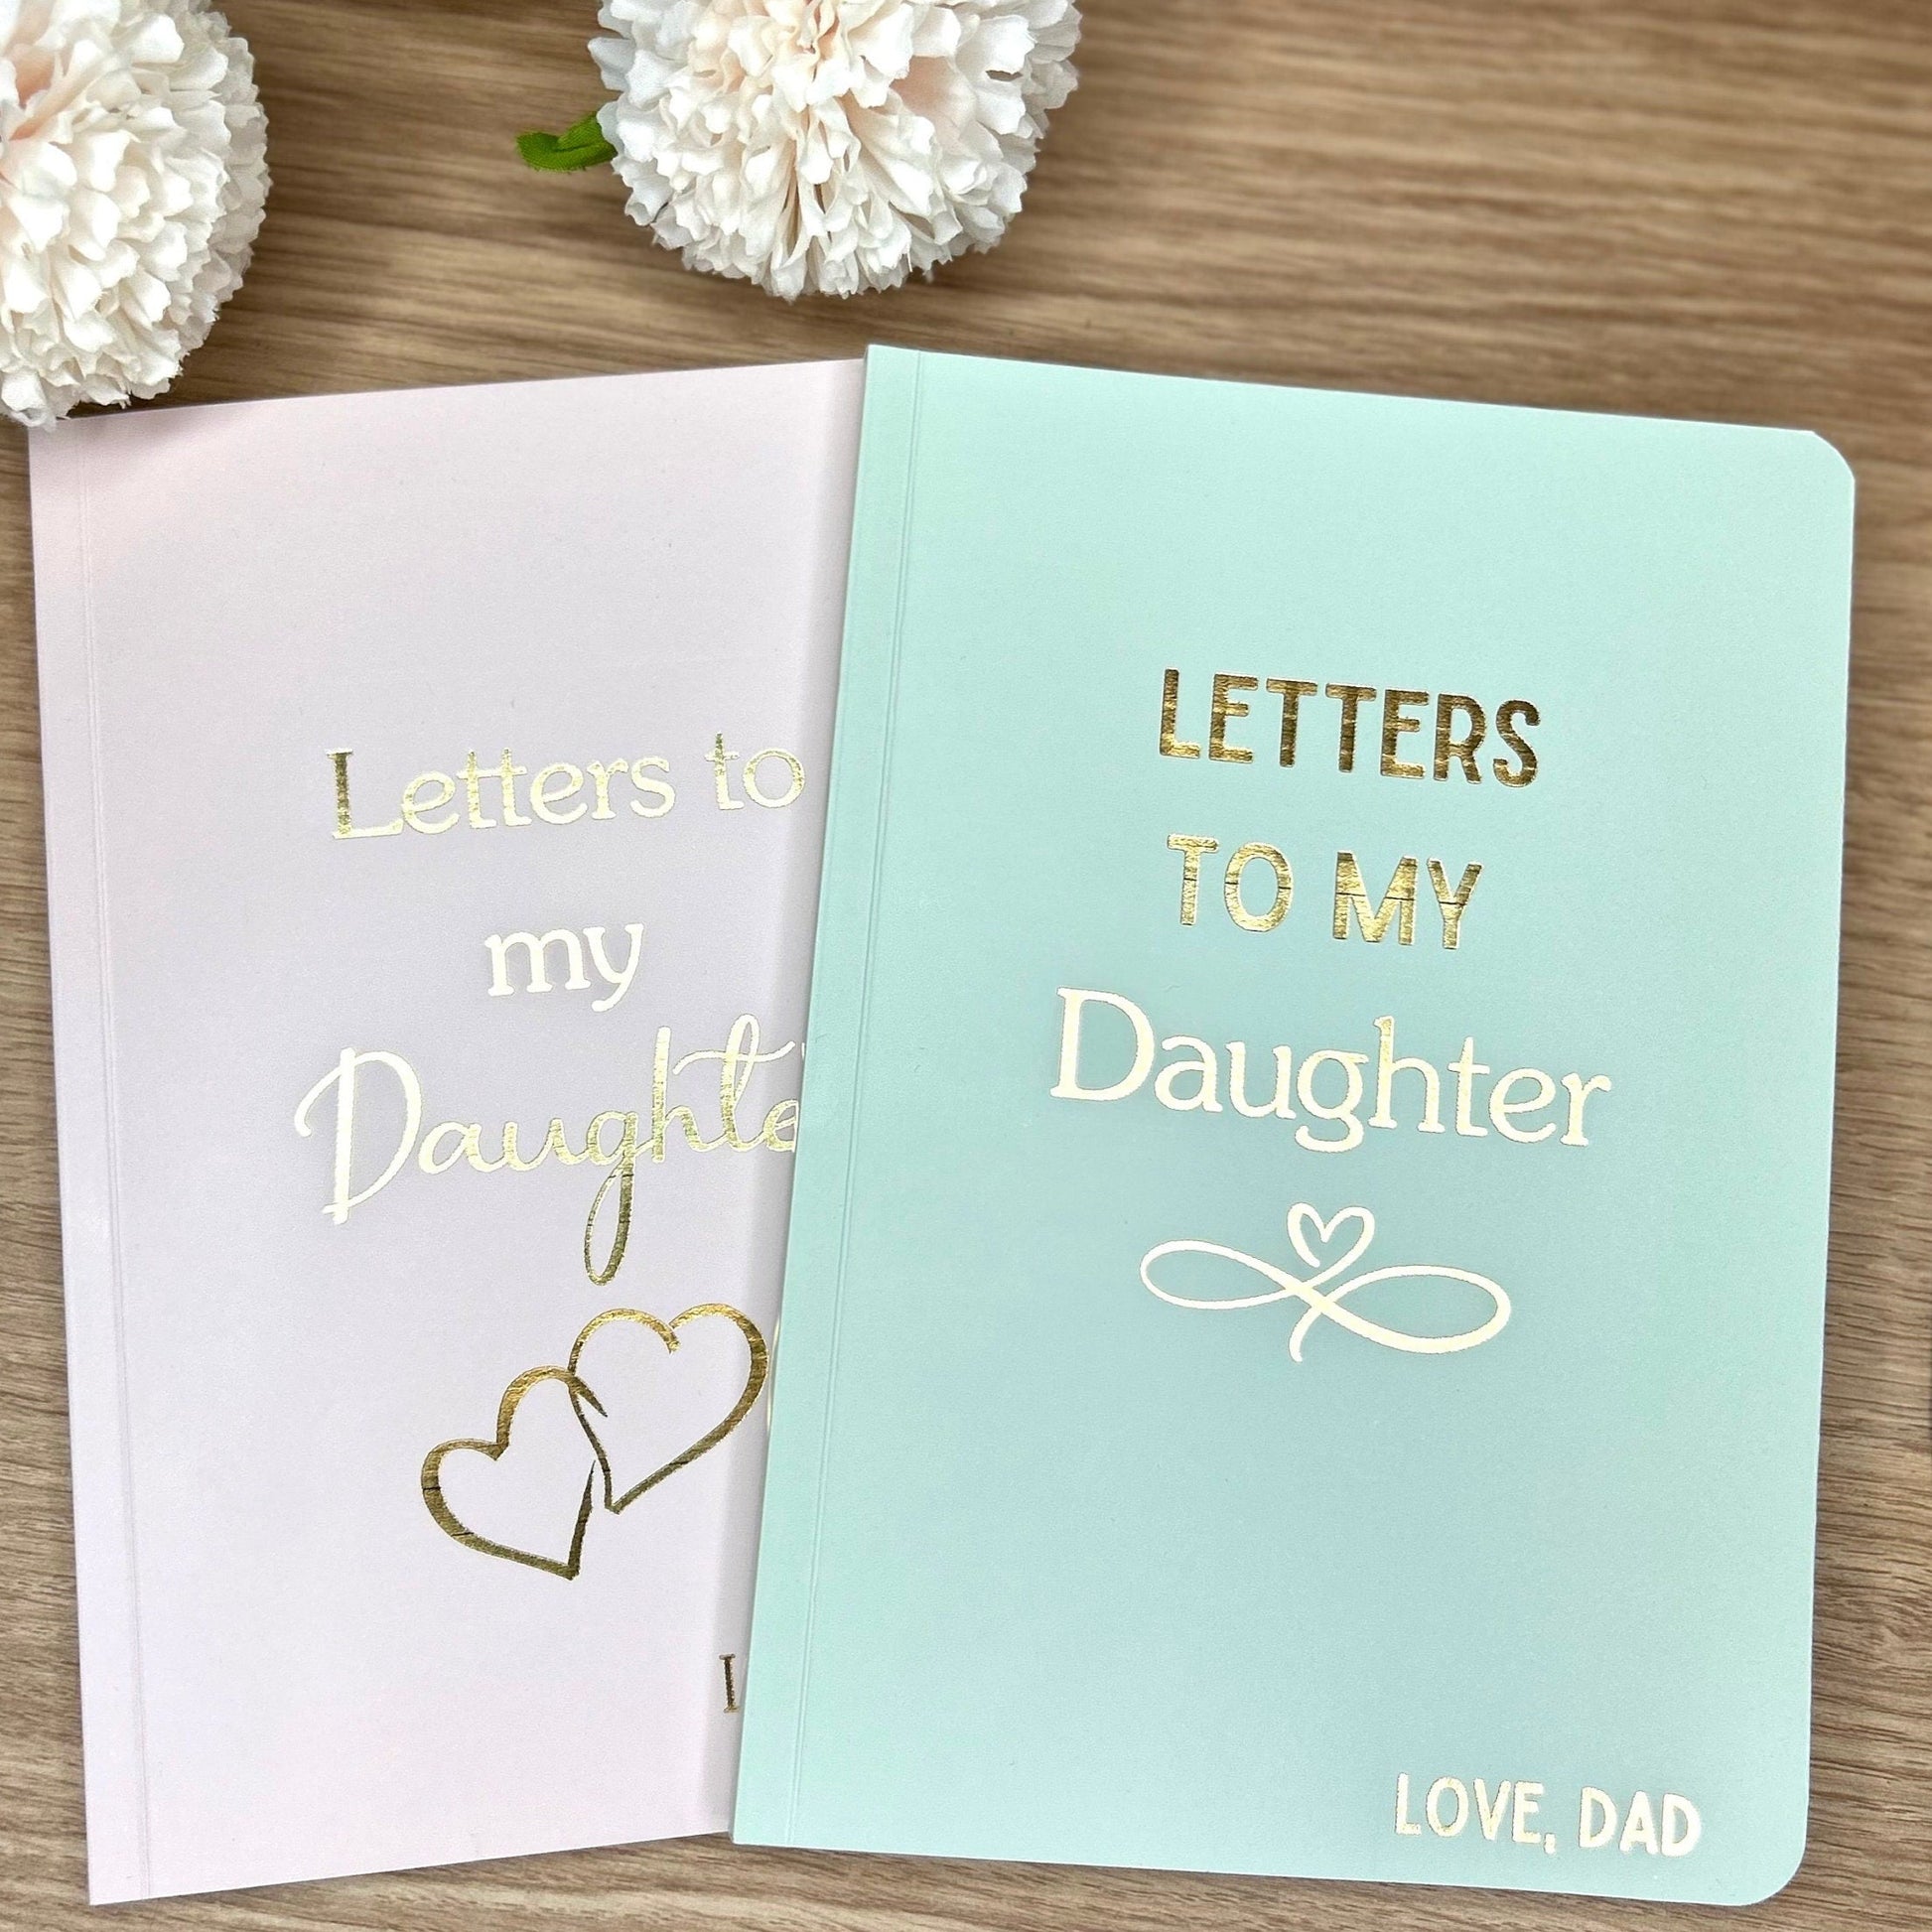 two softback notebooks, one in sage that says 'Letters to my Daughter' and the other one in pink saying 'Letters to my Daughter